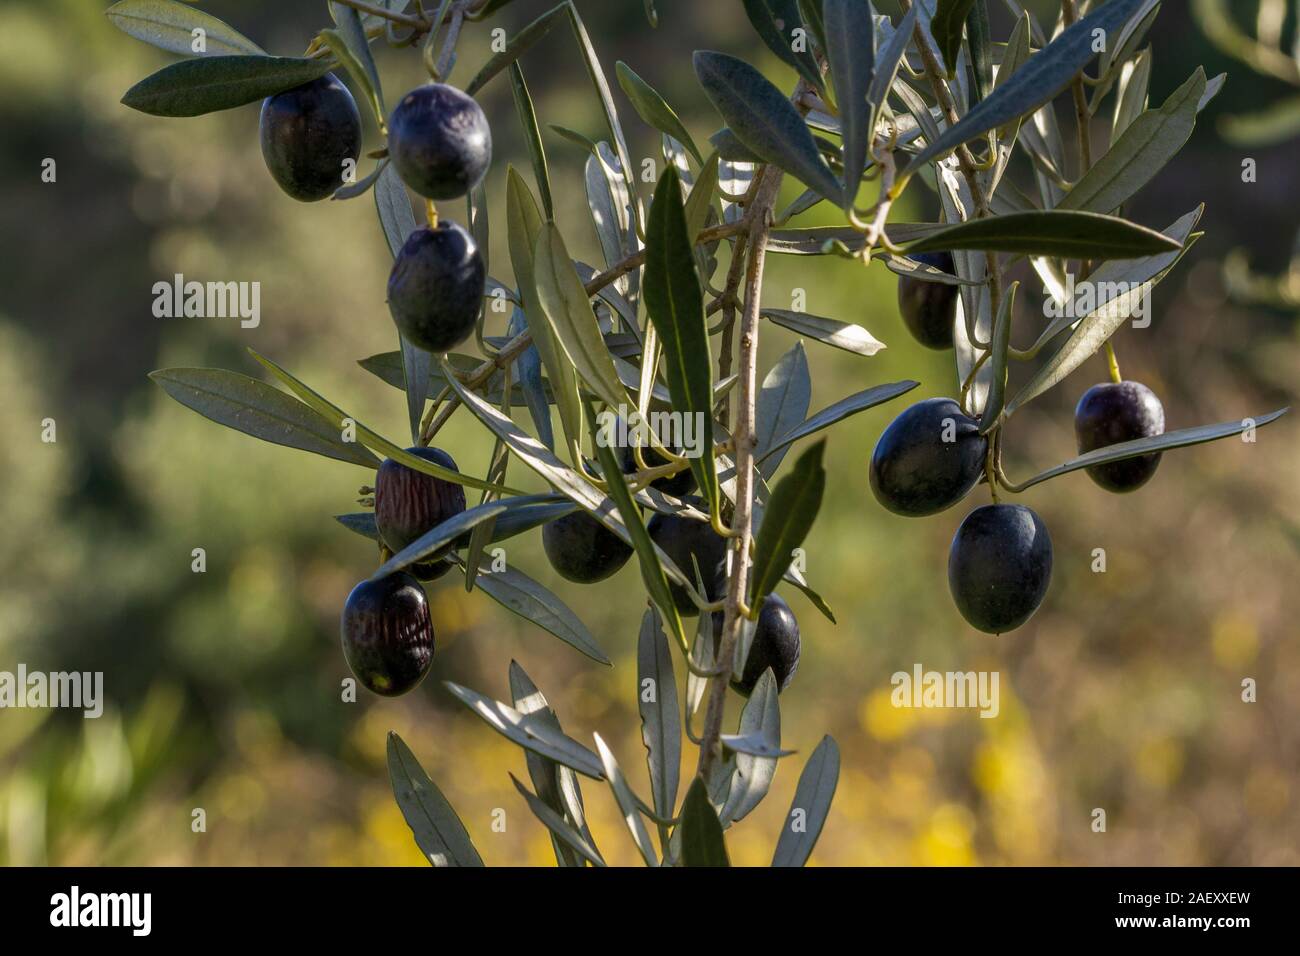 Olea europaea, Black Olives on the Branch Stock Photo